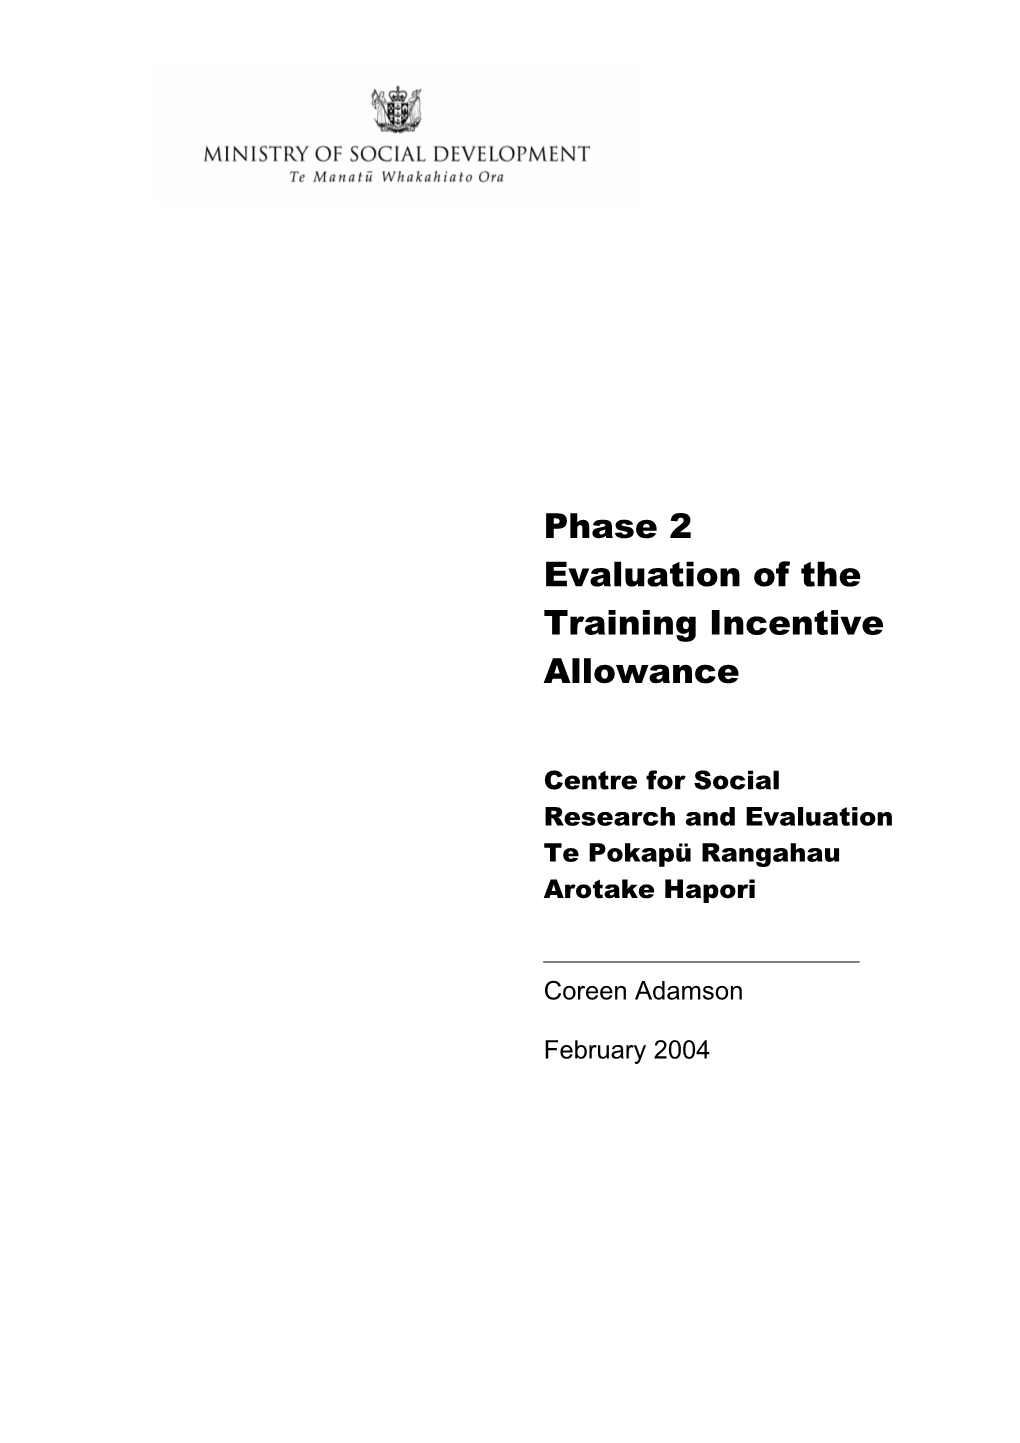 Phase 1 of the Evaluation of the Training Incentive Allowance